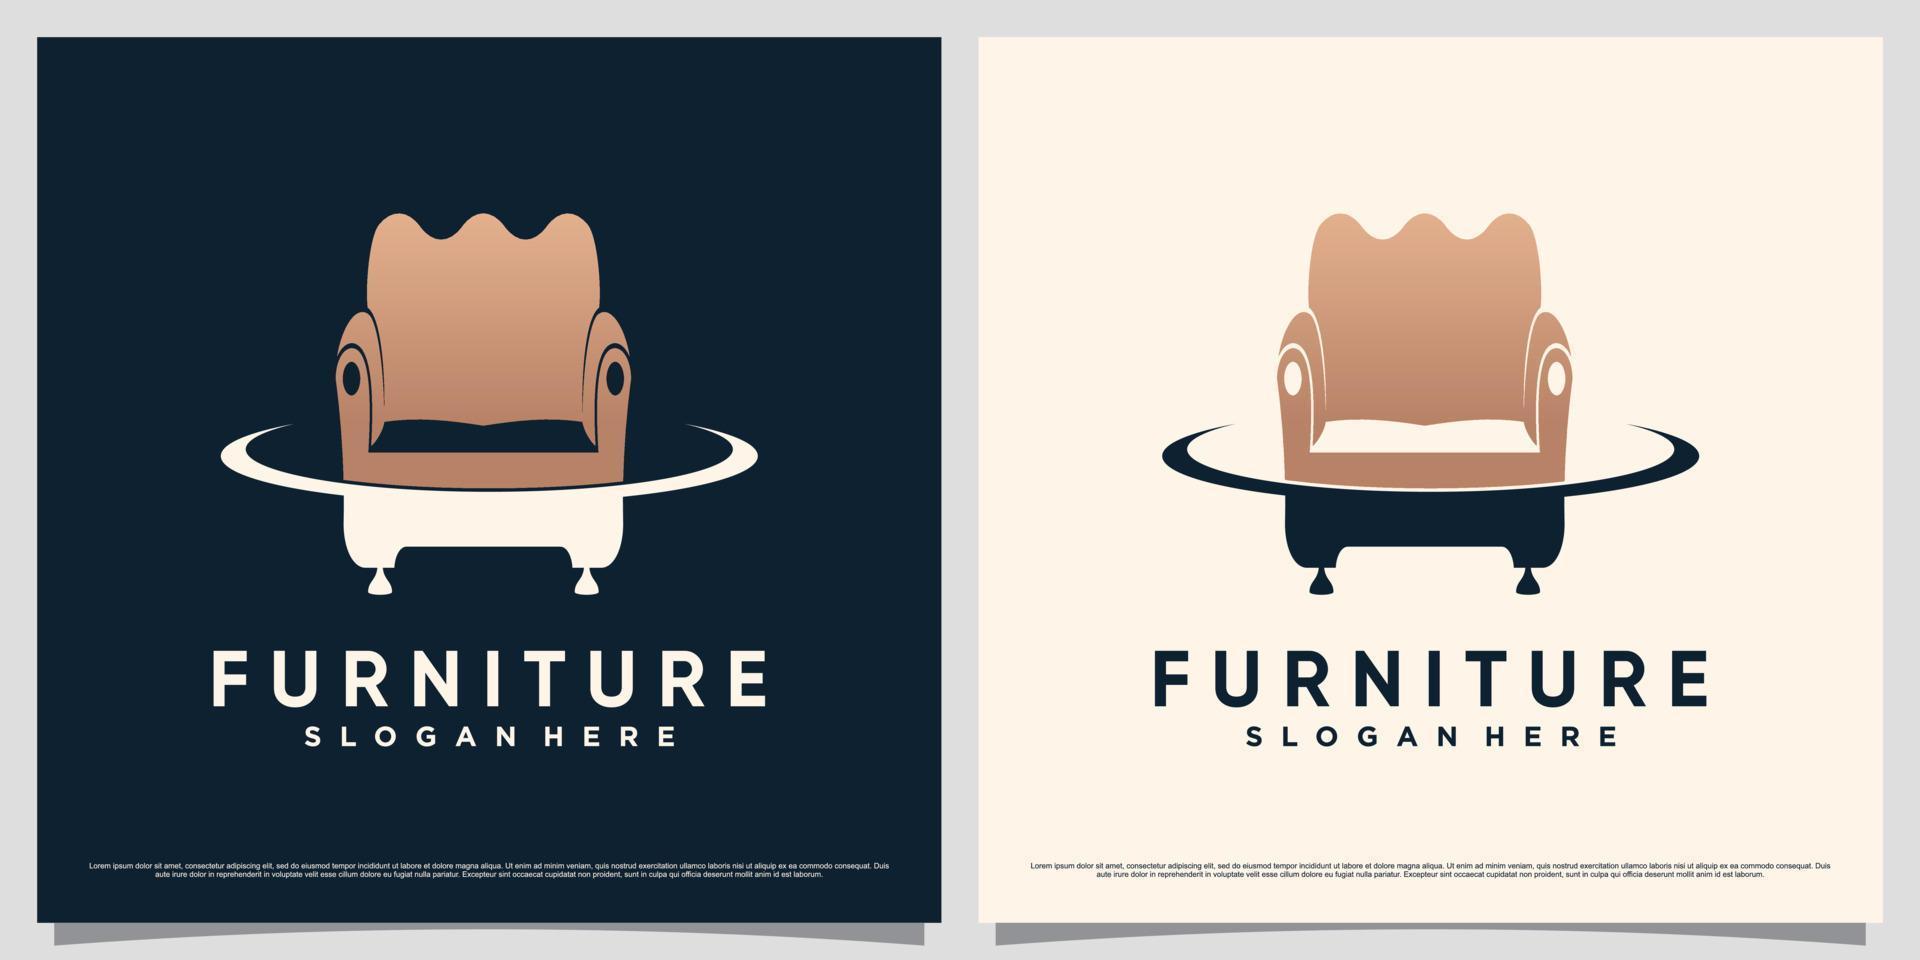 Furniture interior logo design inspiration with chair or sofa icon and modern concept vector